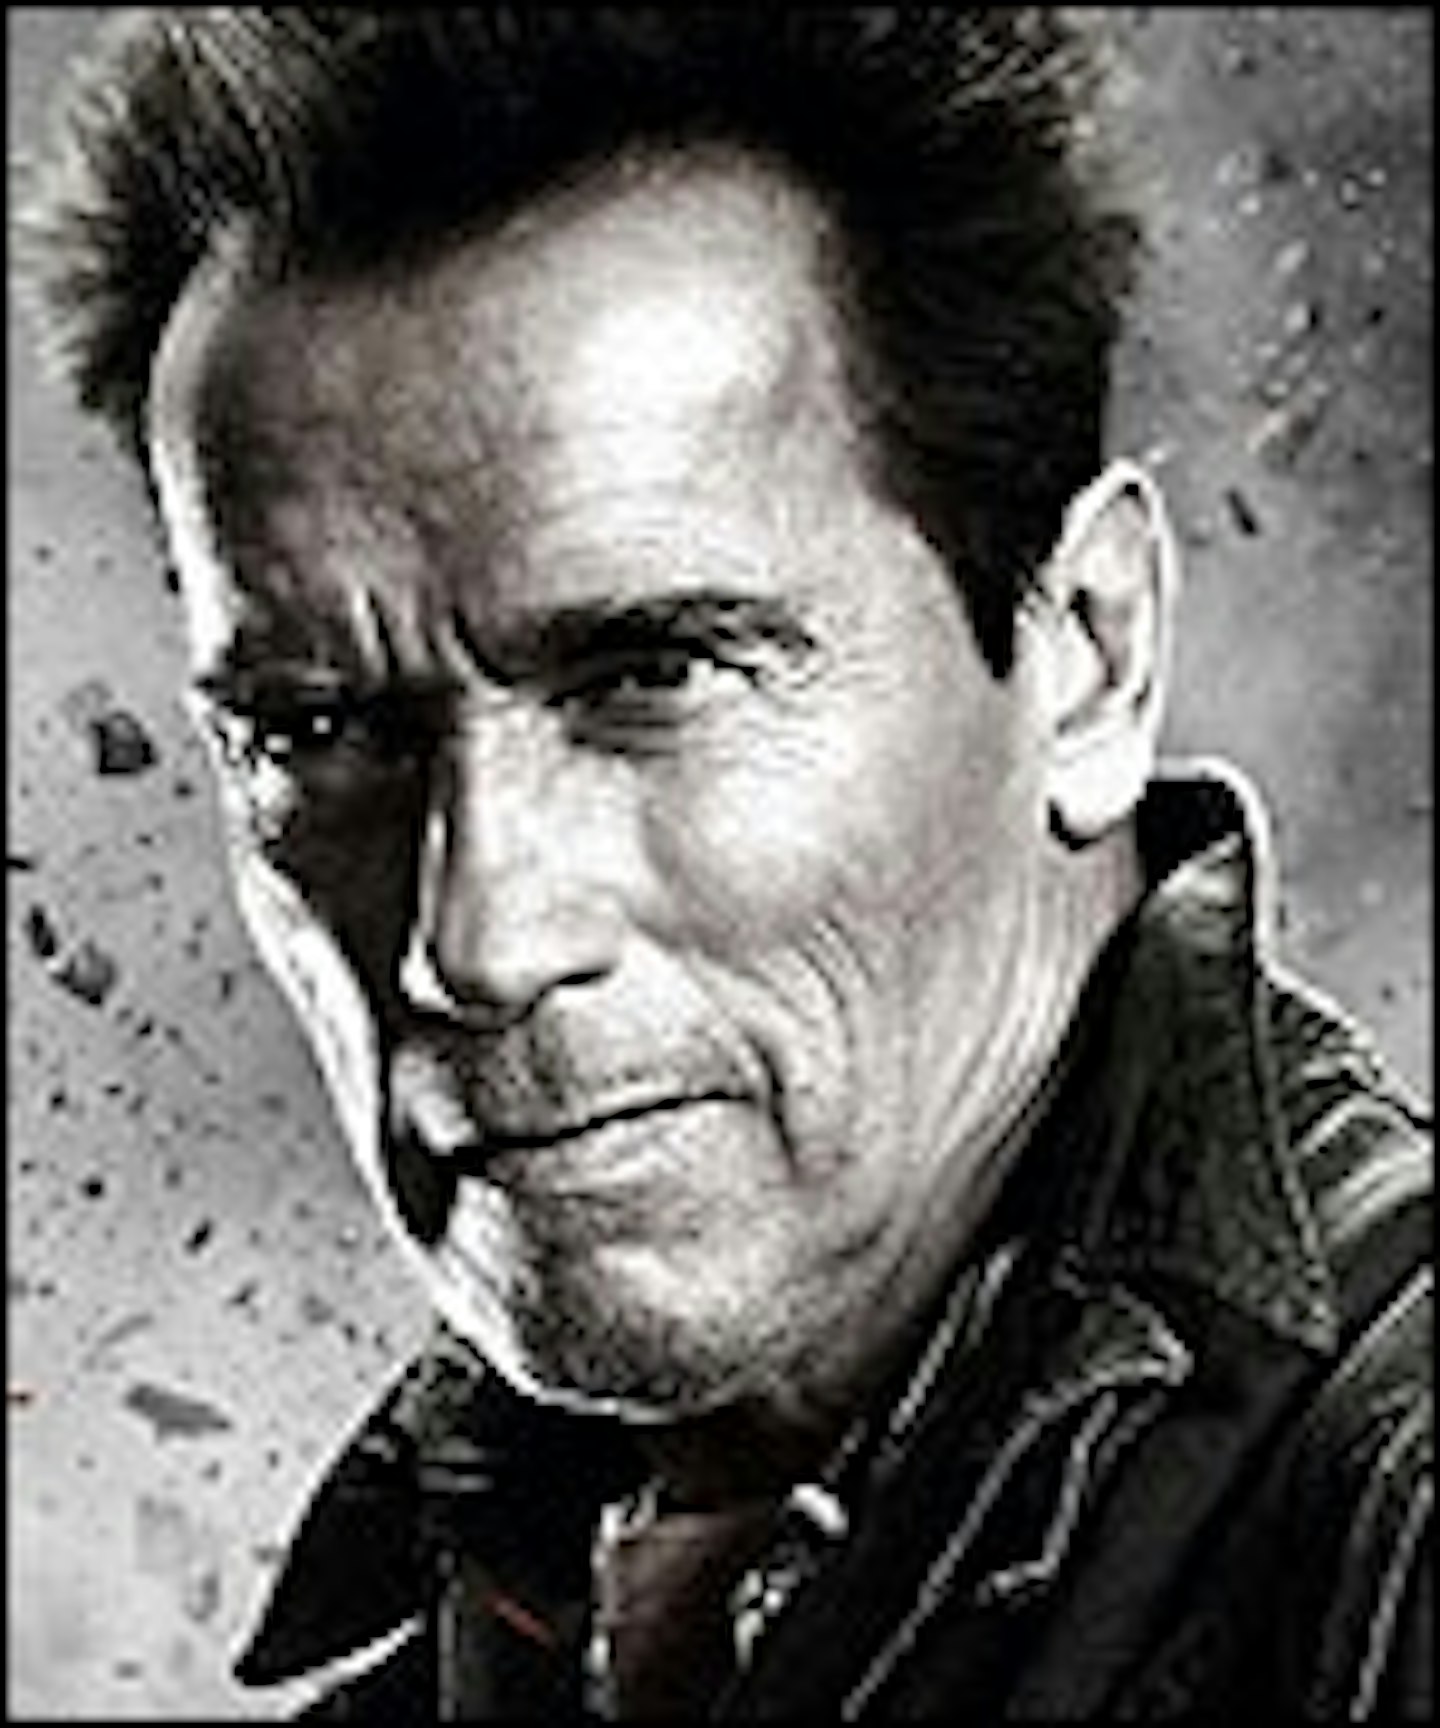 Expendables 2 Character Posters Blast In